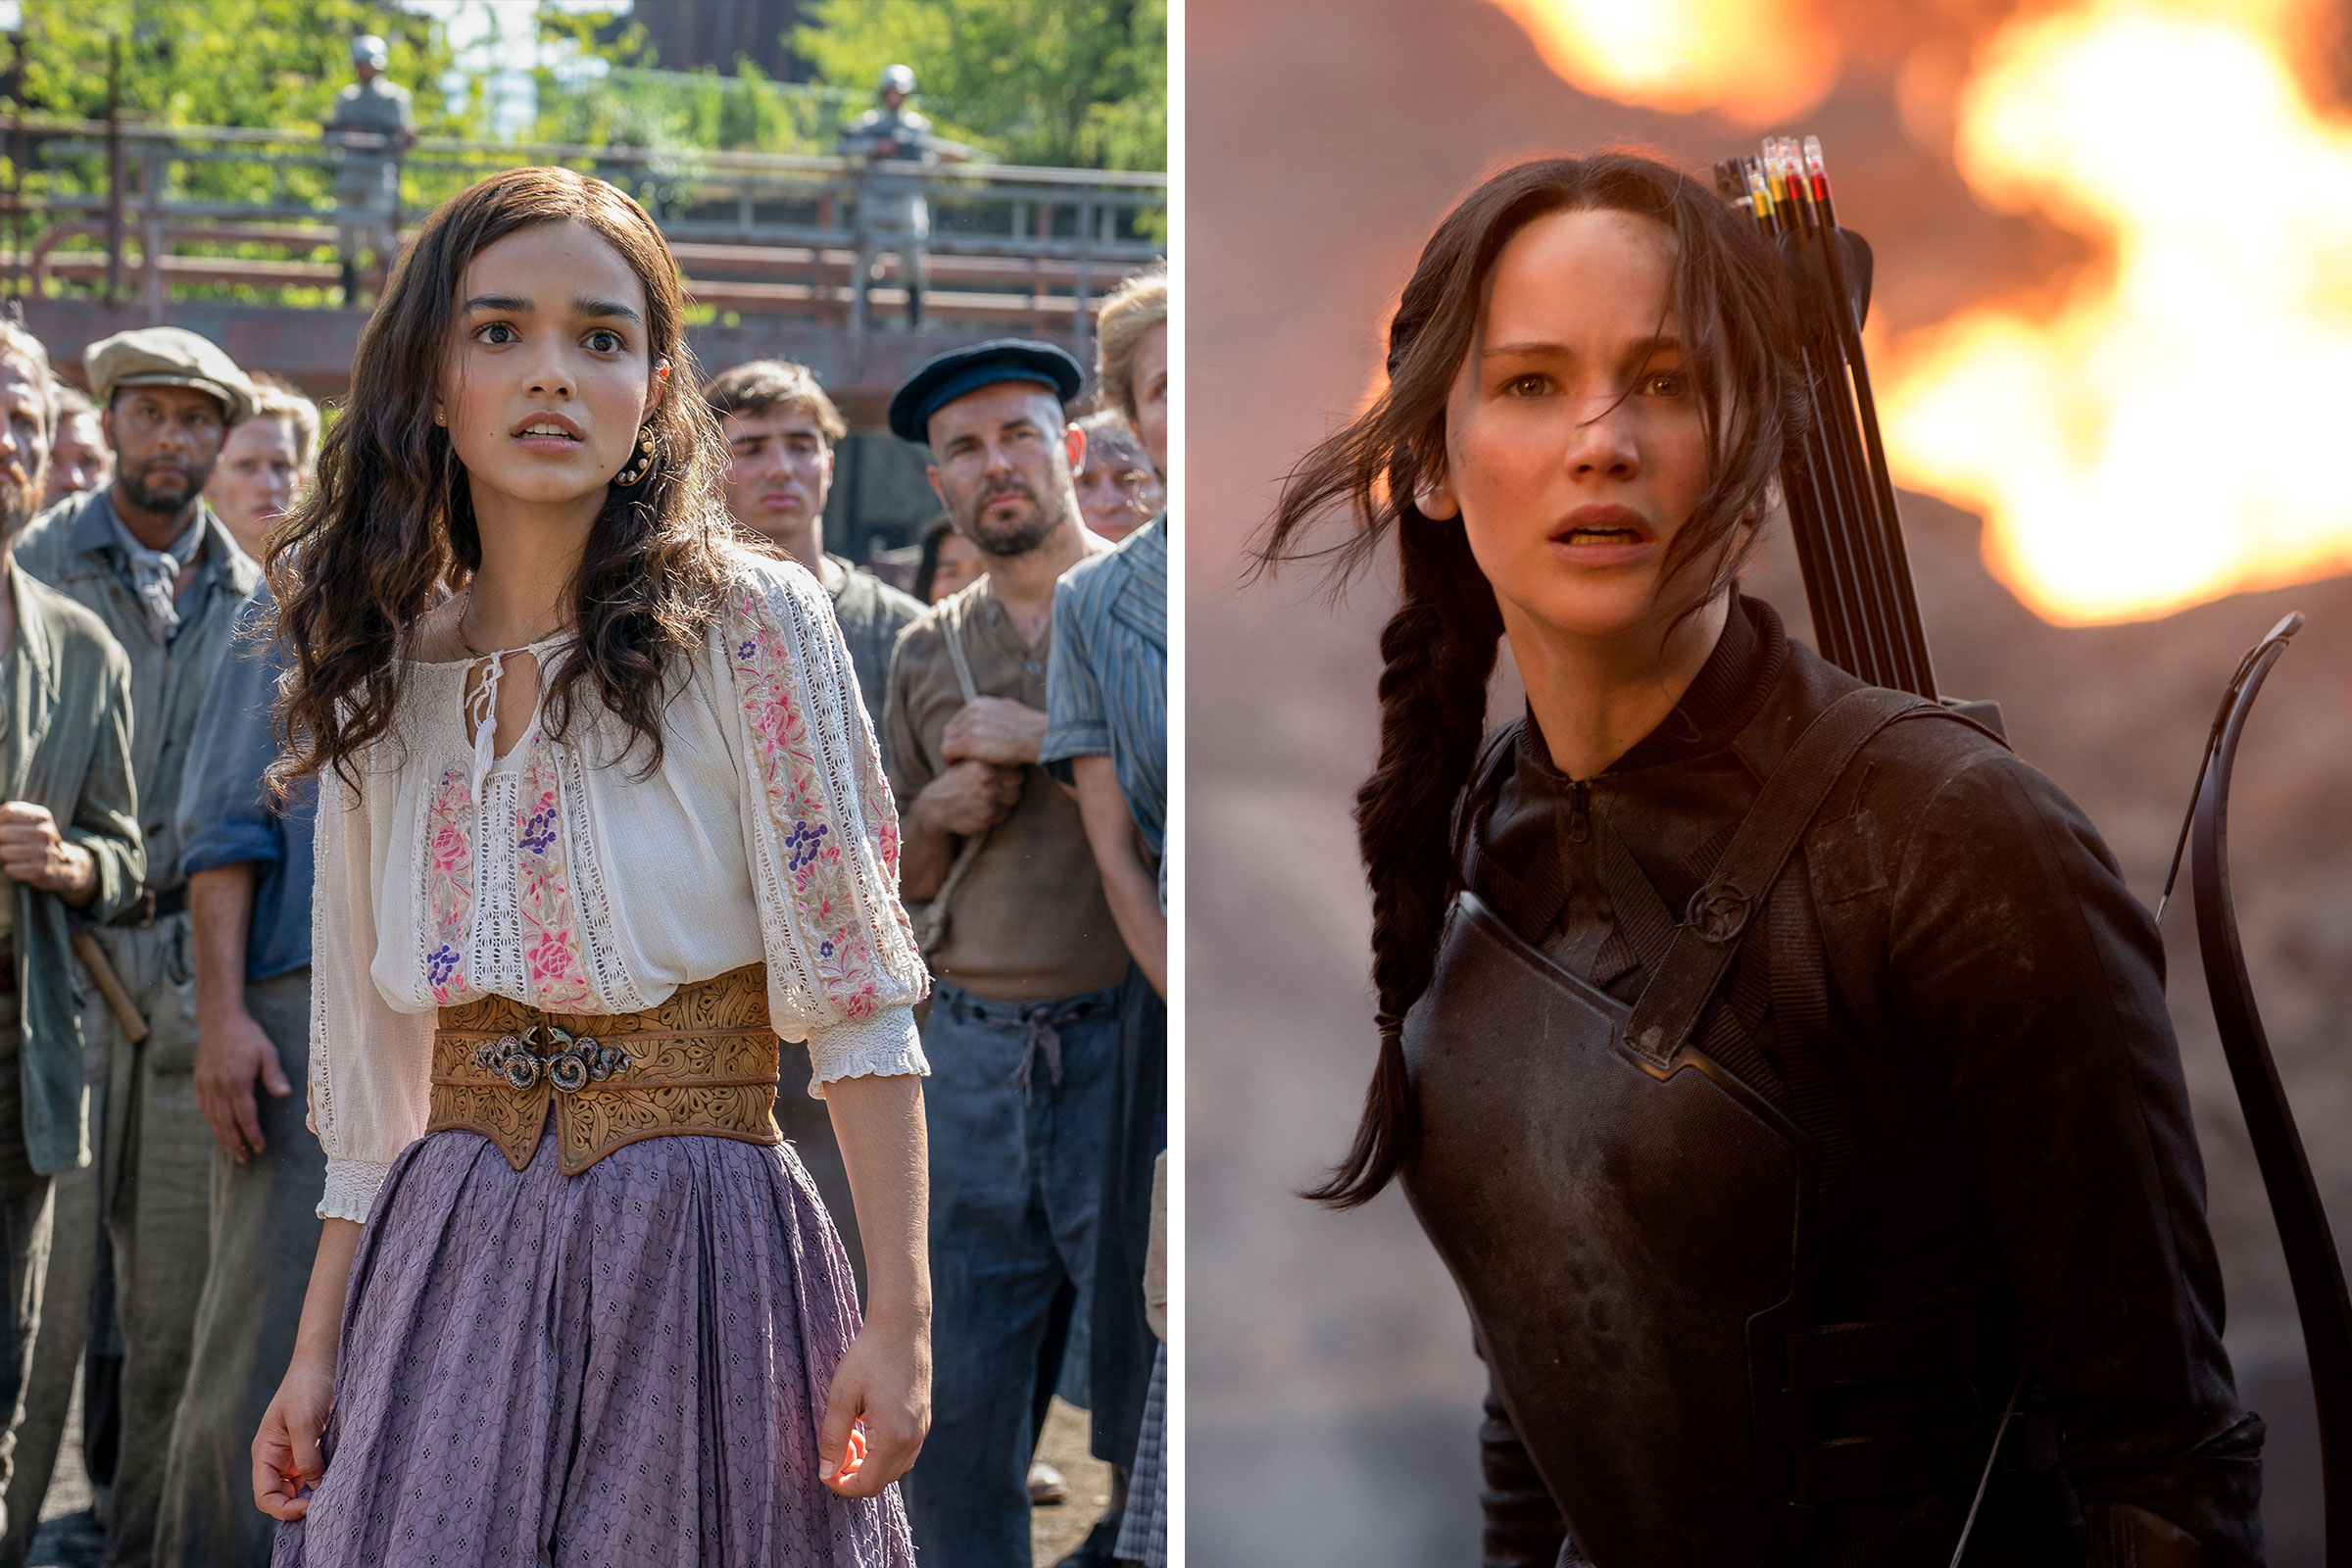 Rachel Zegler as Lucy Gray Baird in The Hunger Games: The Ballad of Songbirds and Snakes; Jennifer Lawrence as Katniss Everdeen in The Hunger Games: Mockingjay Part I